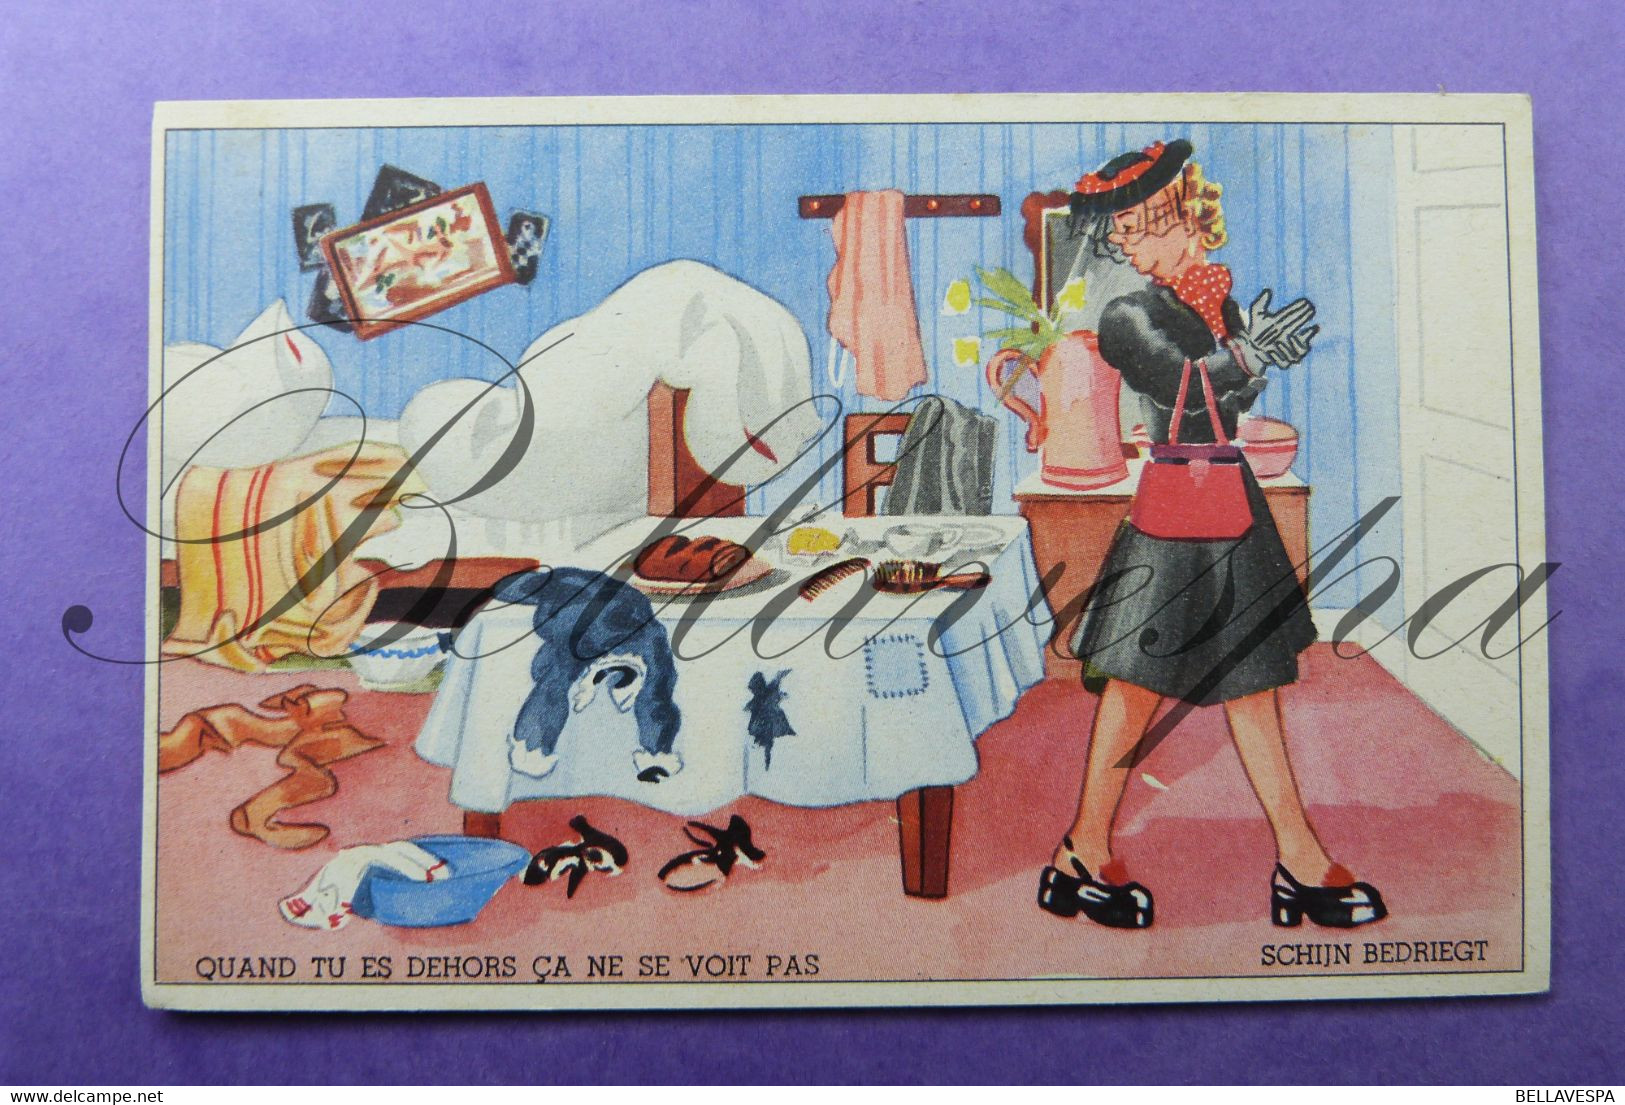 Lot  x  17 cartes postale postkaarten - cpa- Humor Married to the daily grind / Promo